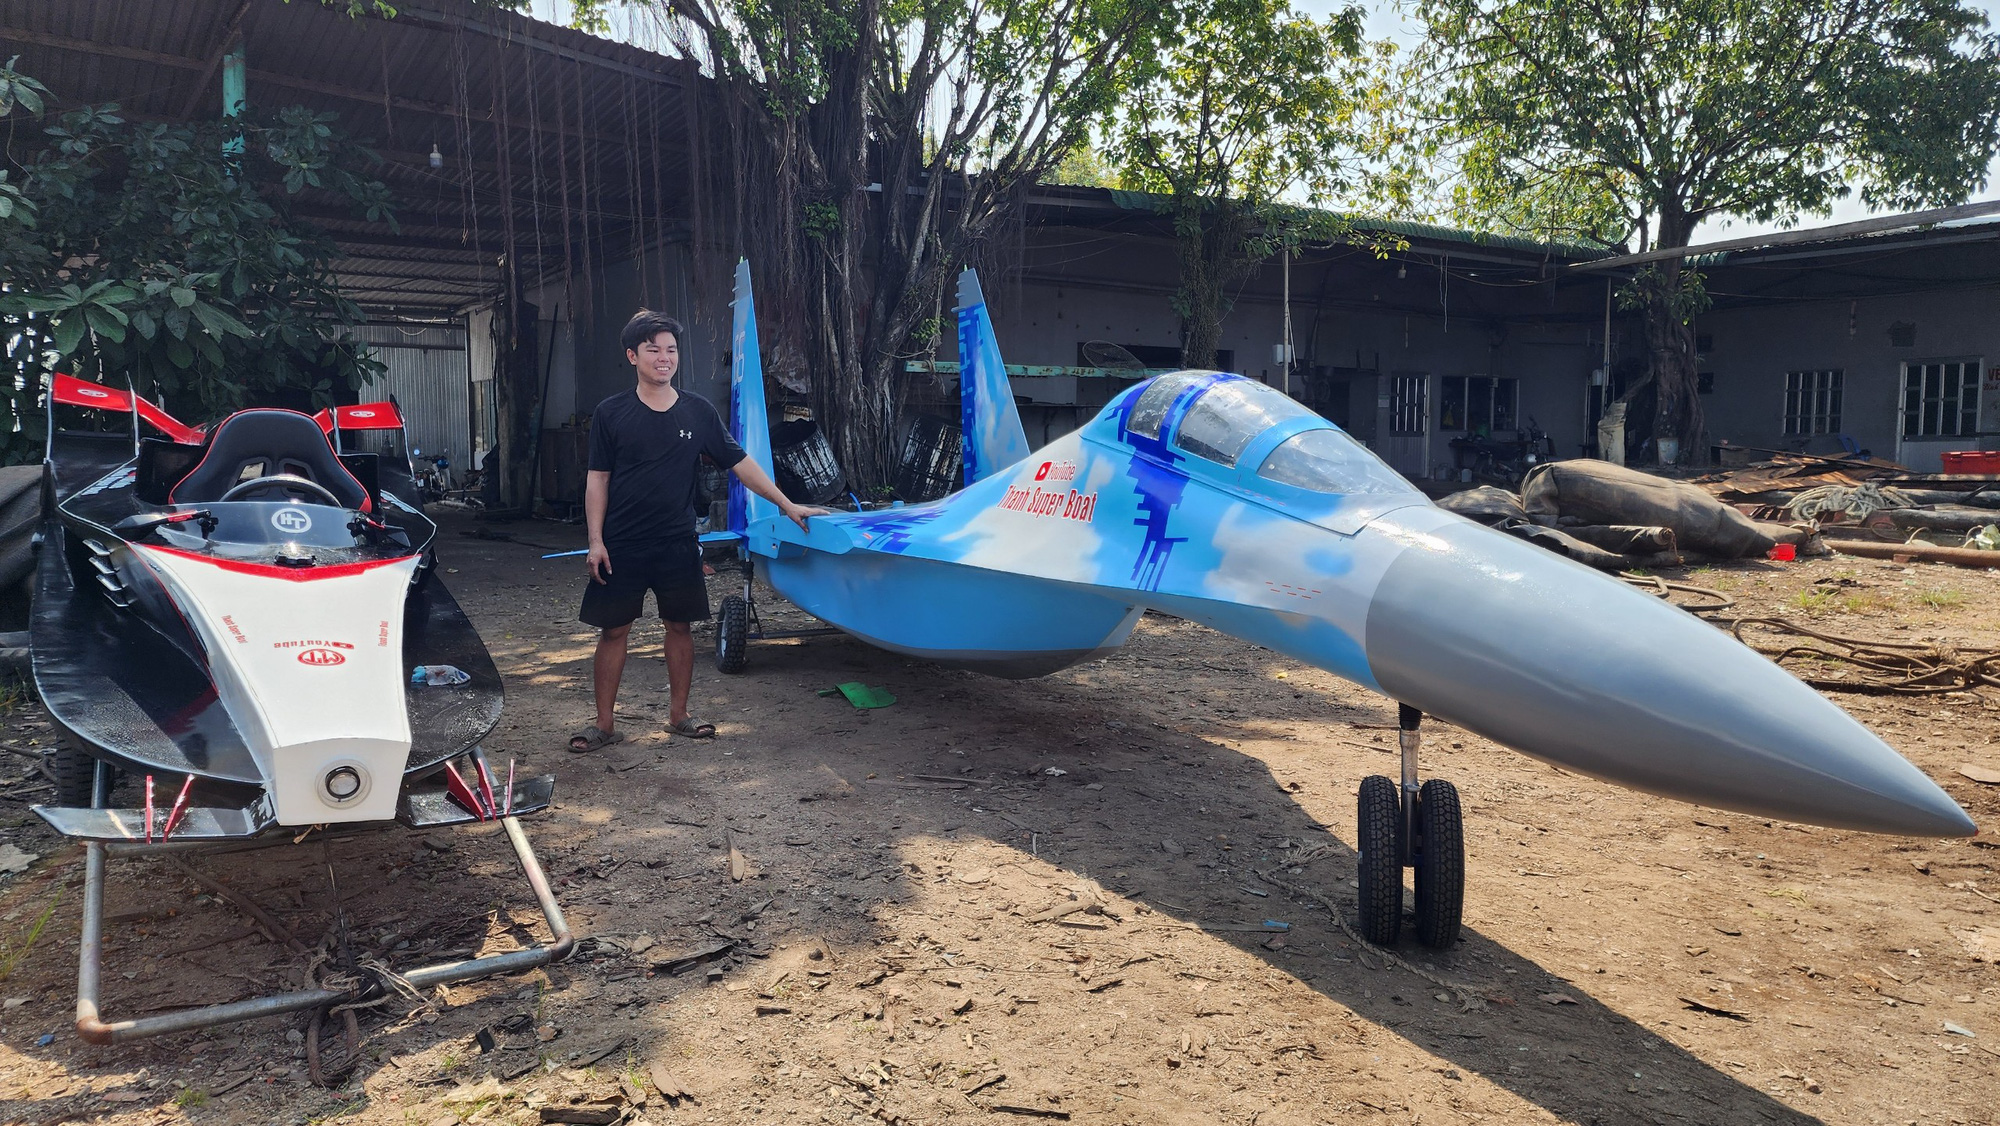 Mai Hoang Thanh showcases his water-capable Su-35 aircraft model in Hon Dat District, Kien Giang Province, southern Vietnam. Photo: Hoang Thanh / Tuoi Tre